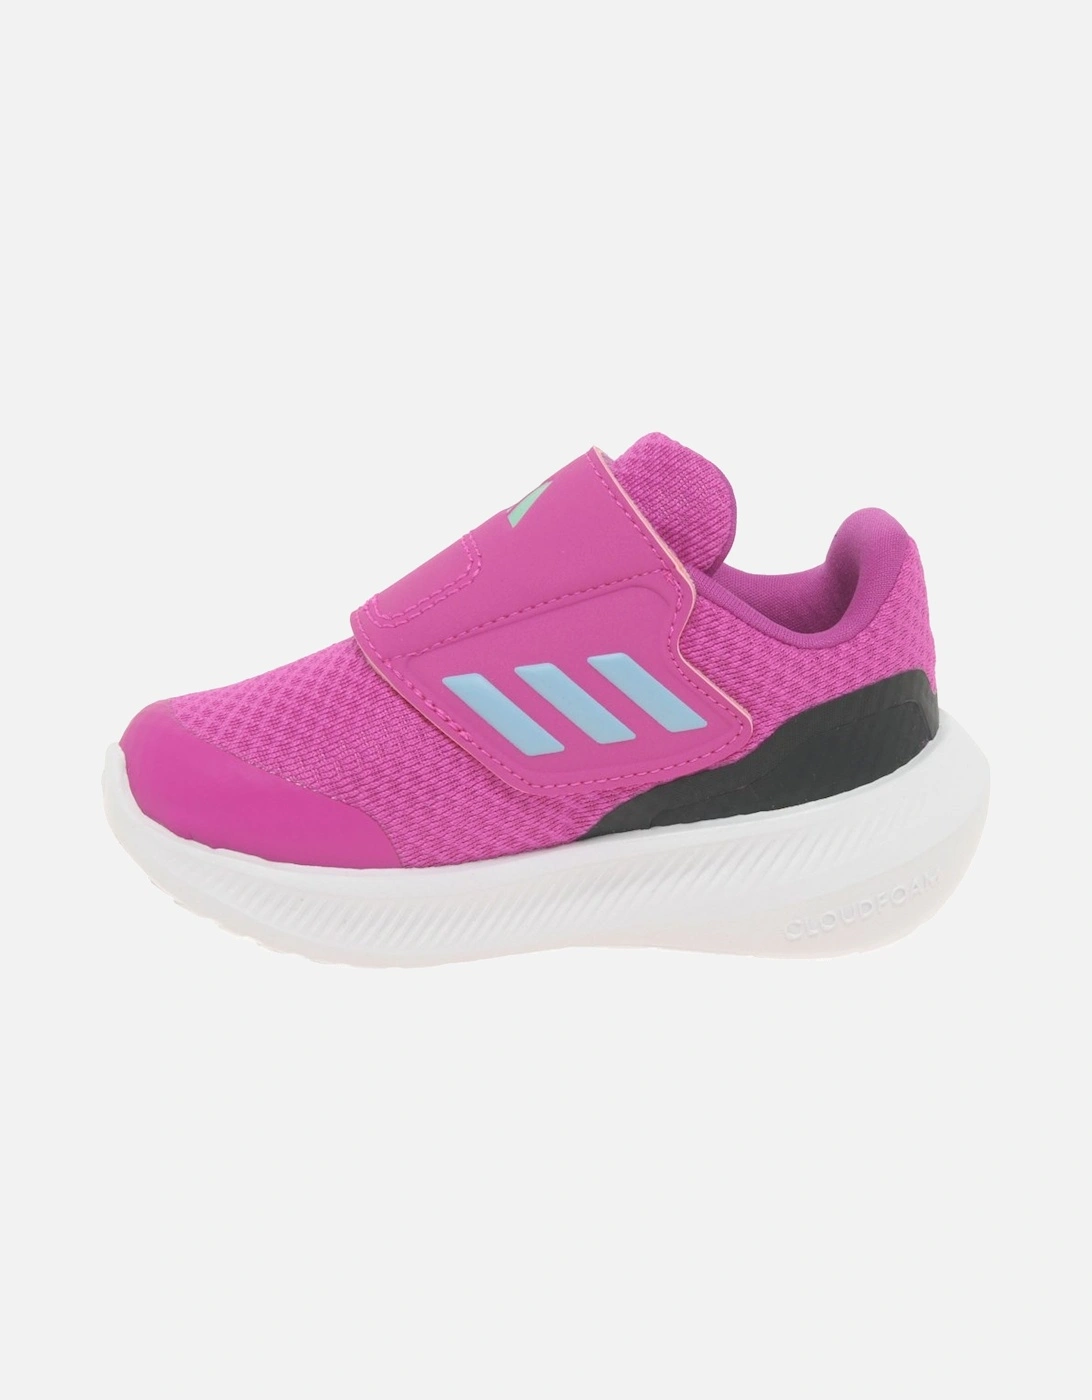 Runfalcon 3.0 Girls Infant Trainers